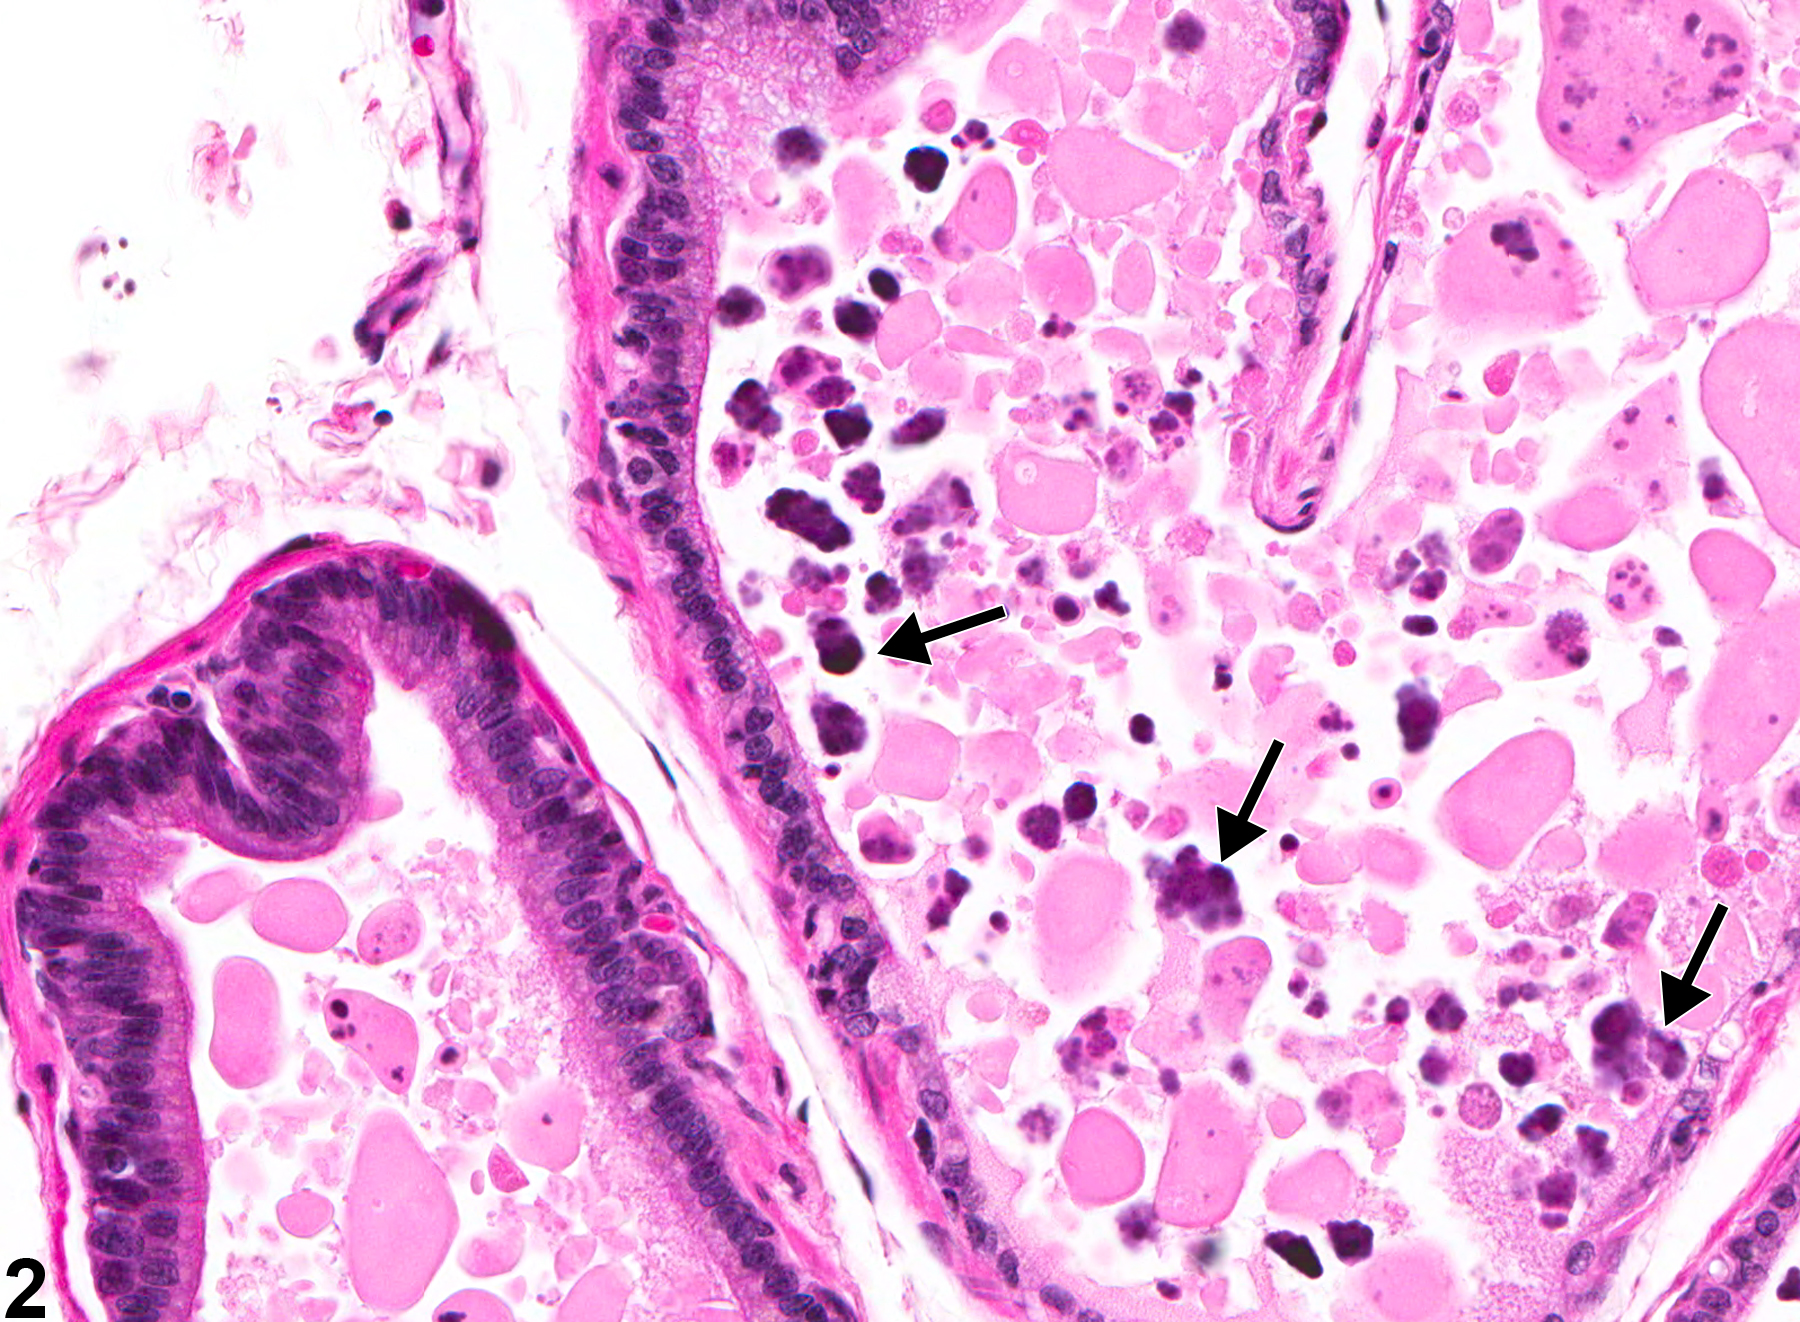 Image of acinar secretory alteration in the prostate from a male F344/N rat in a chronic study